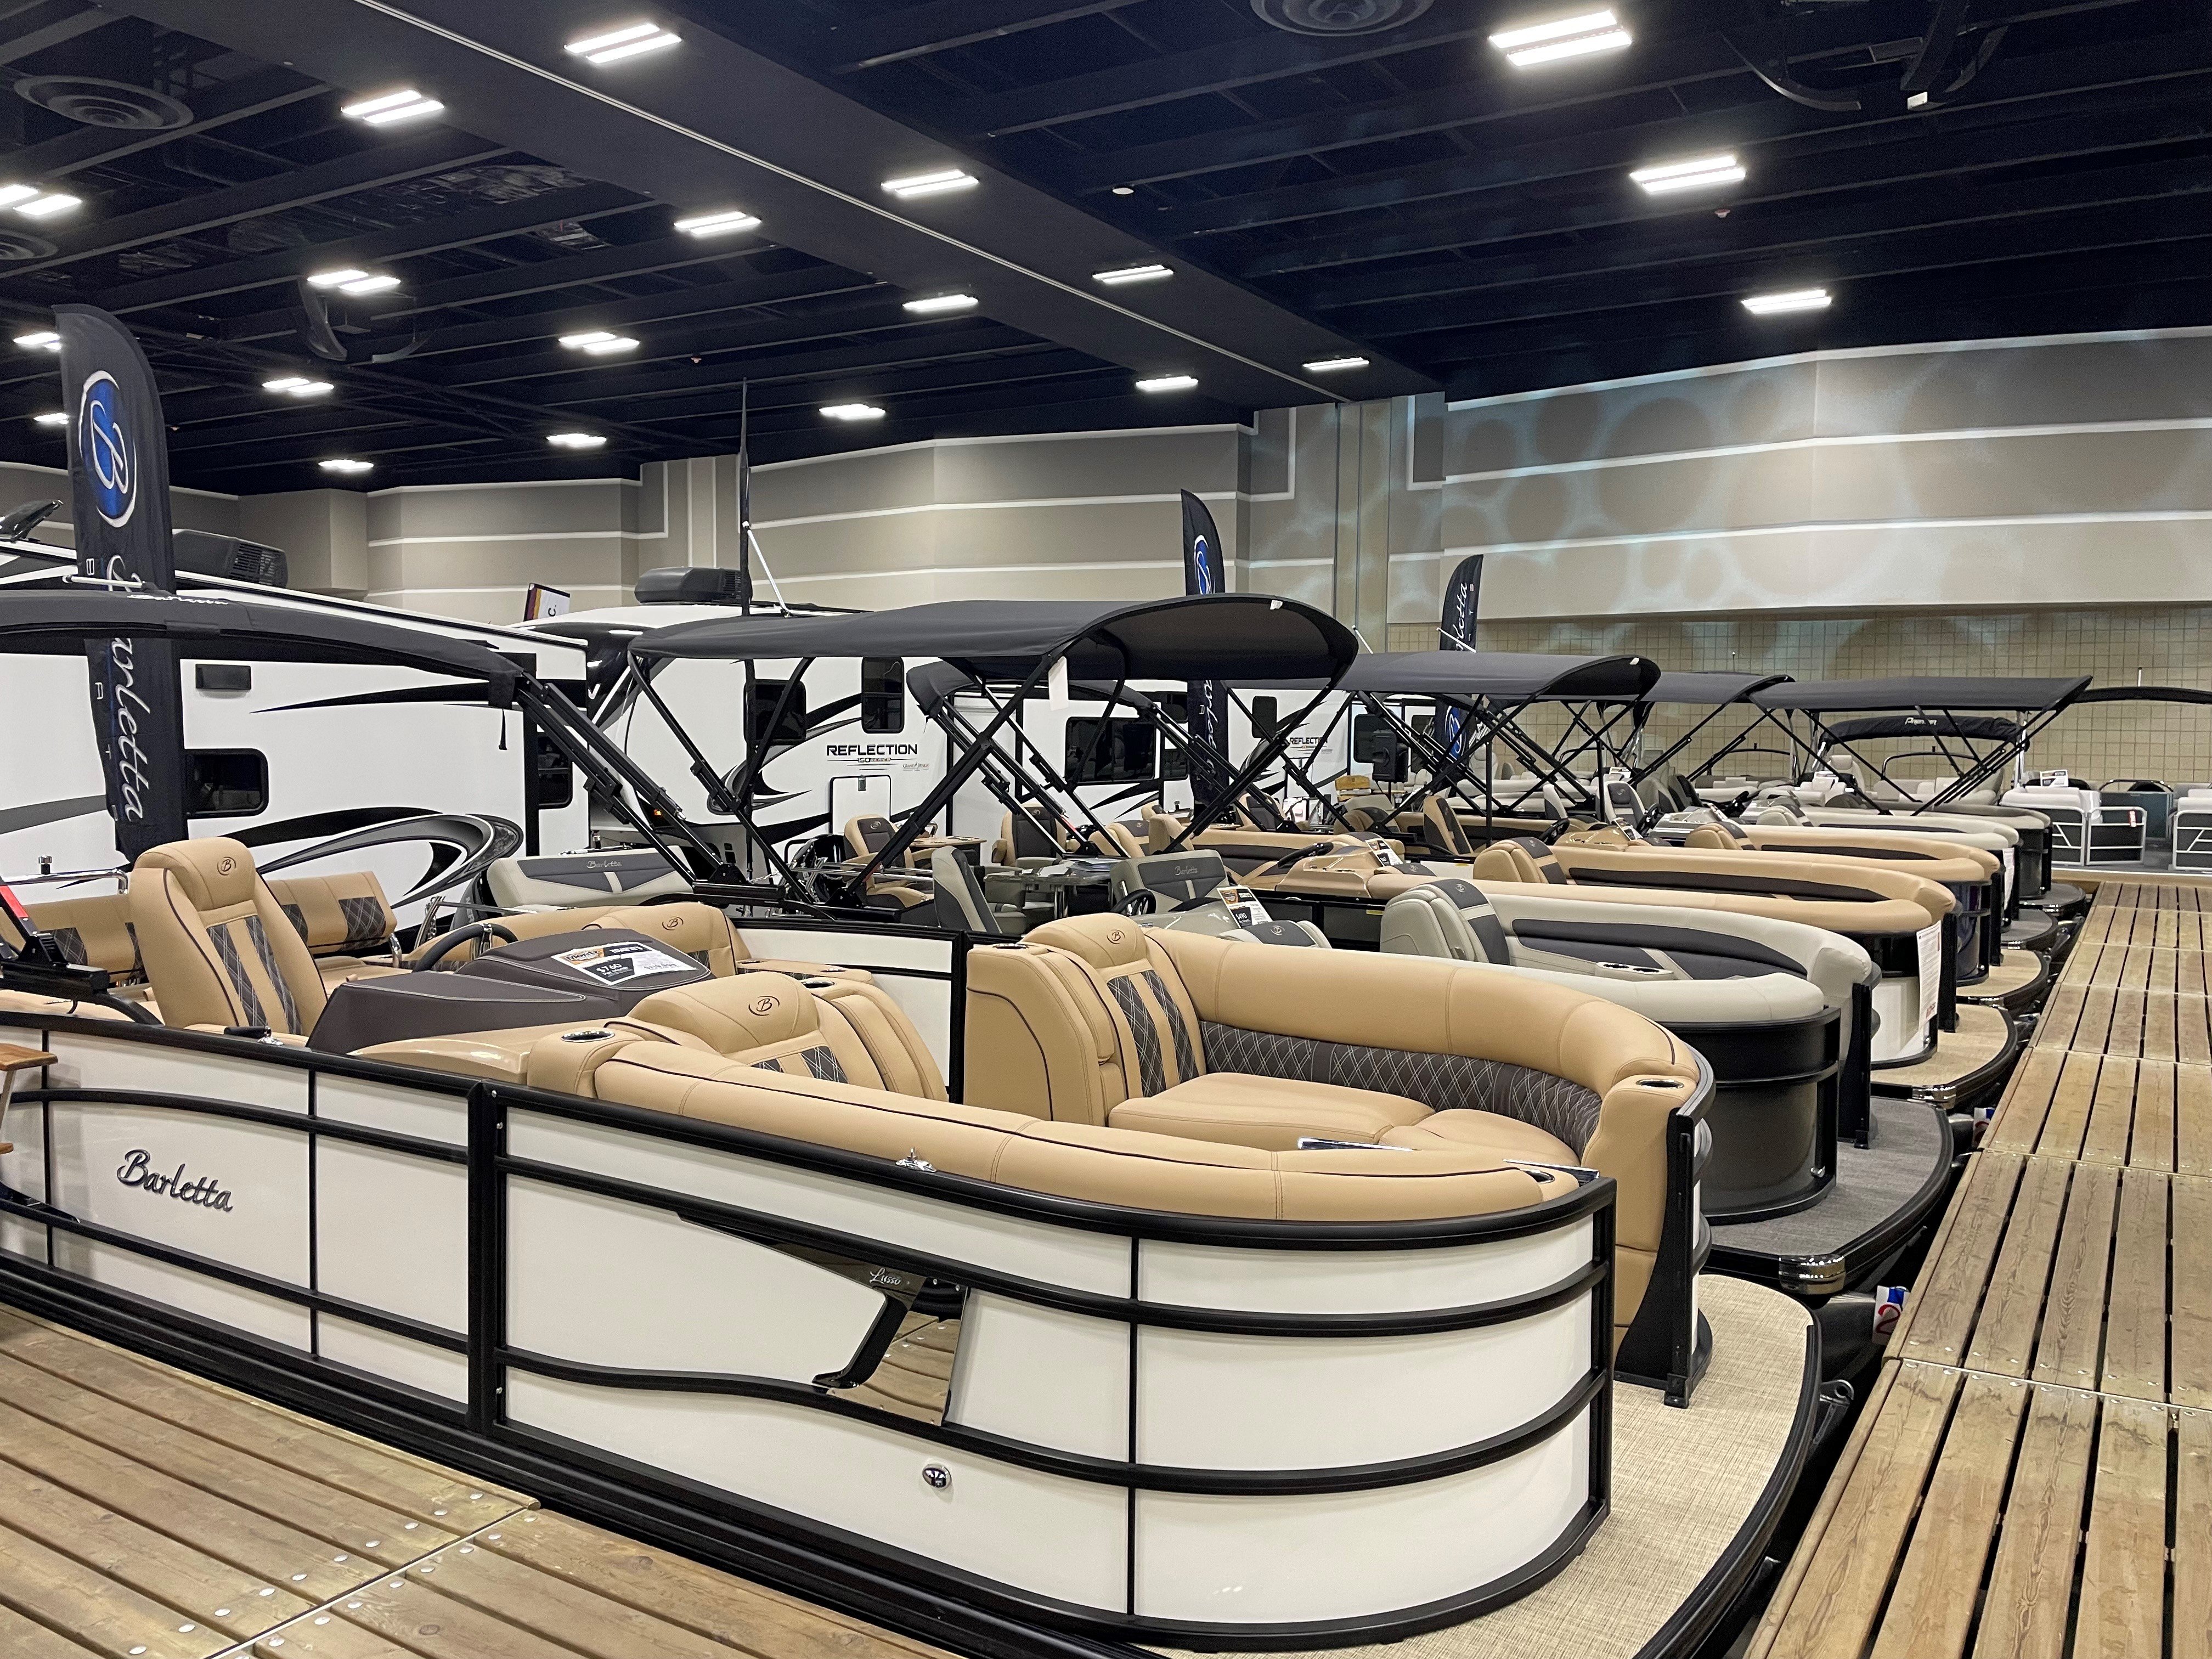 Boat Show Checklist (Print Before you Shop)